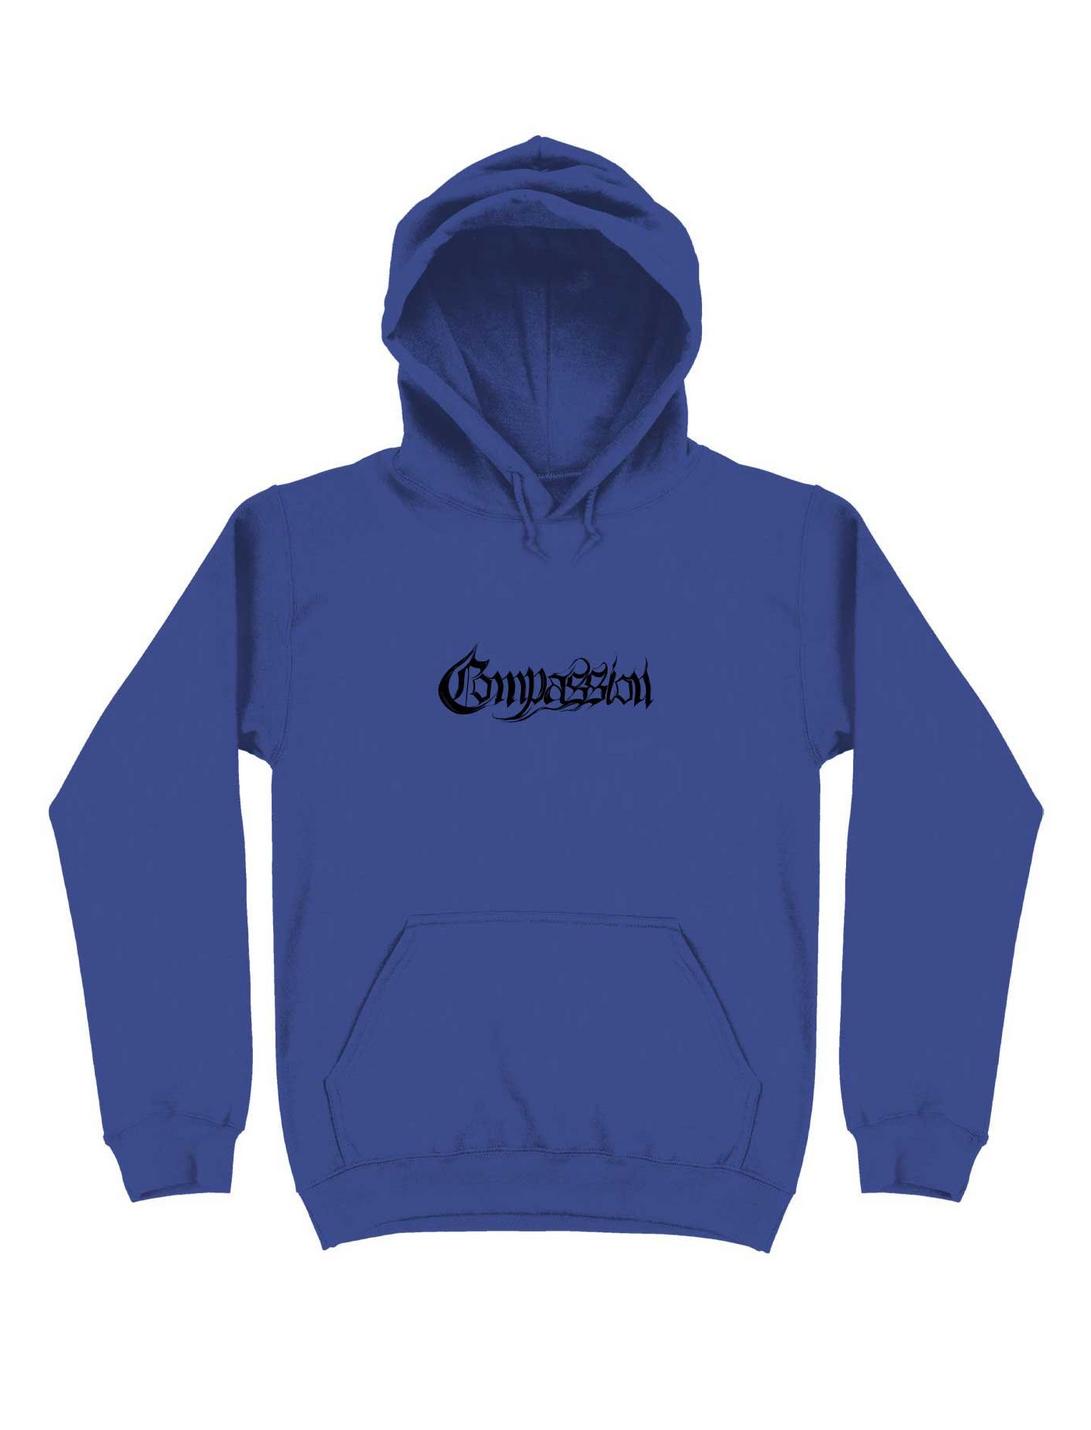 Black History Month Worst Creations Compassion Hoodie, ROYAL, hi-res